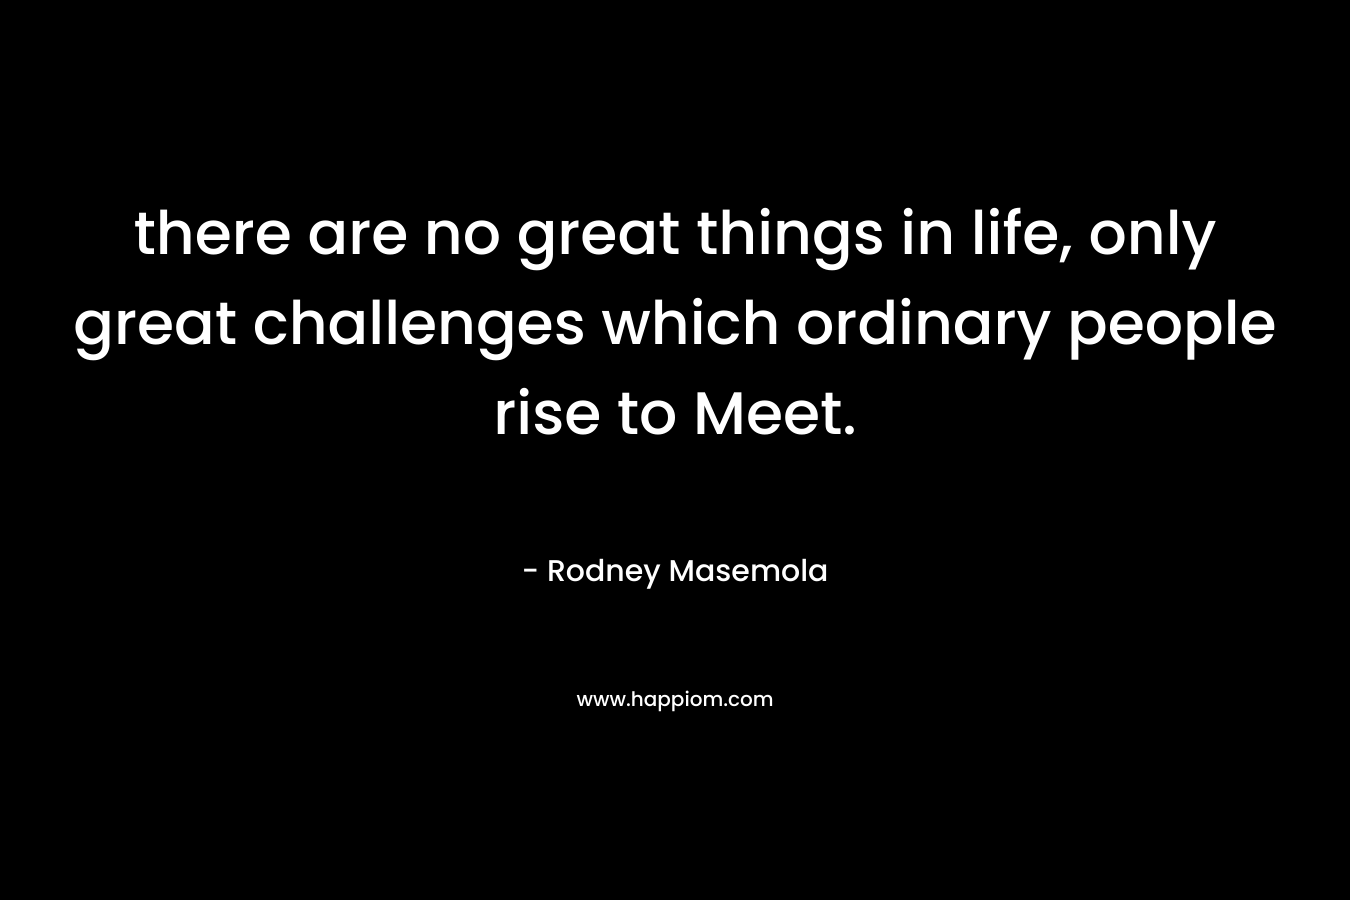 there are no great things in life, only great challenges which ordinary people rise to Meet. – Rodney Masemola